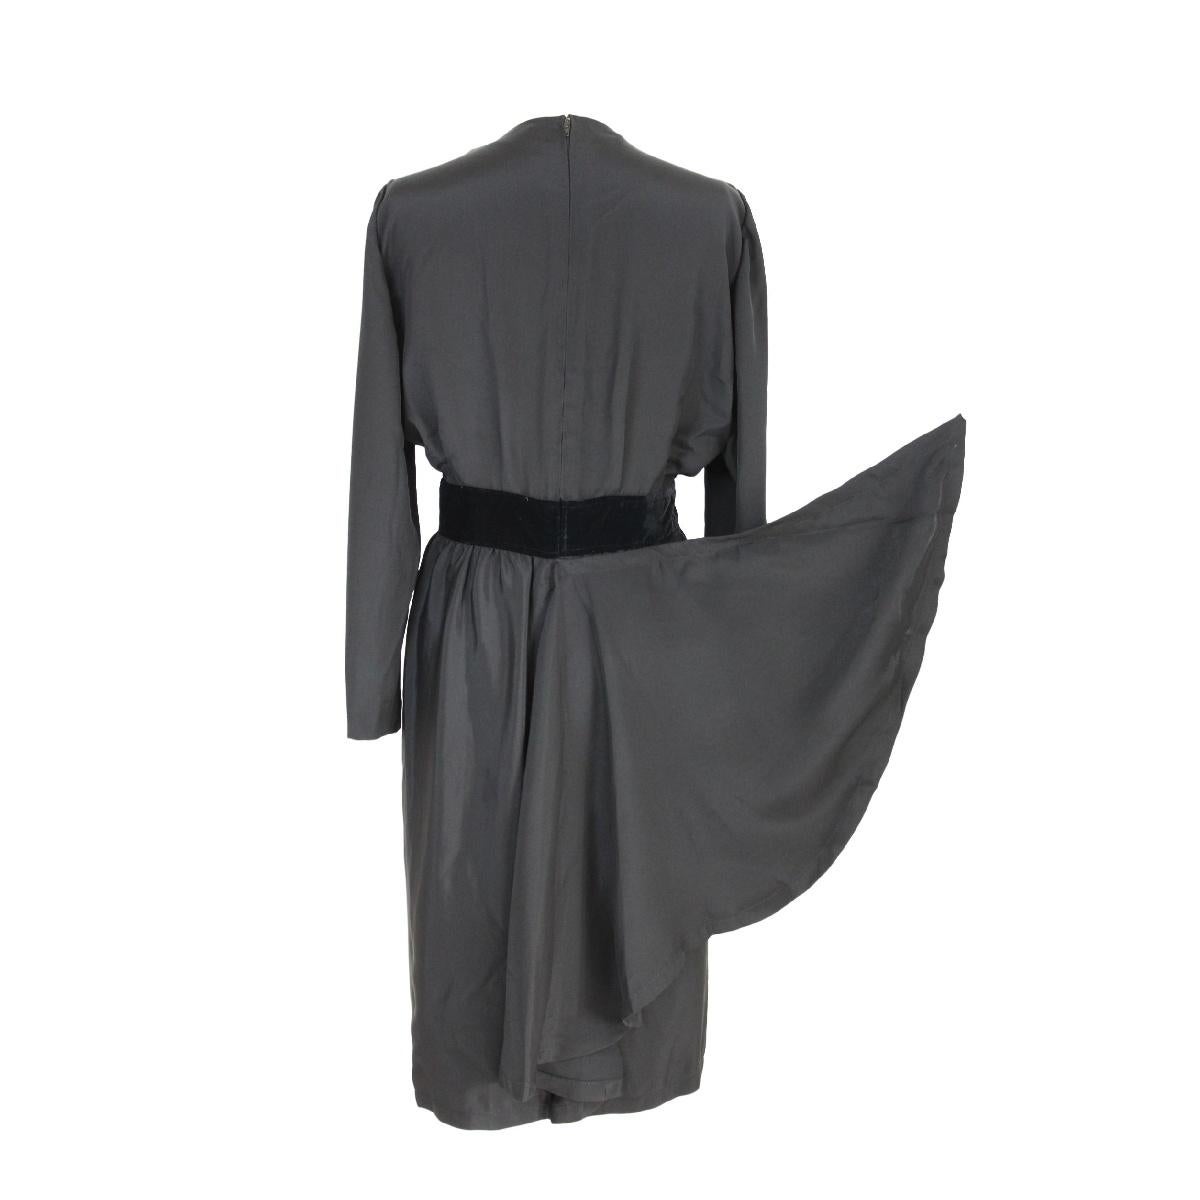 Mario Borsato vintage black evening dress for women. 100% silk, V-neck. Velvet applications on the waist. Pleated on the back. Made in Italy, new with label.

Size 44 It 10 Us 12 Uk

Shoulders: 44 cm
Chest / Bust: 51 cm
Sleeves: 59 cm
Length: 108 cm